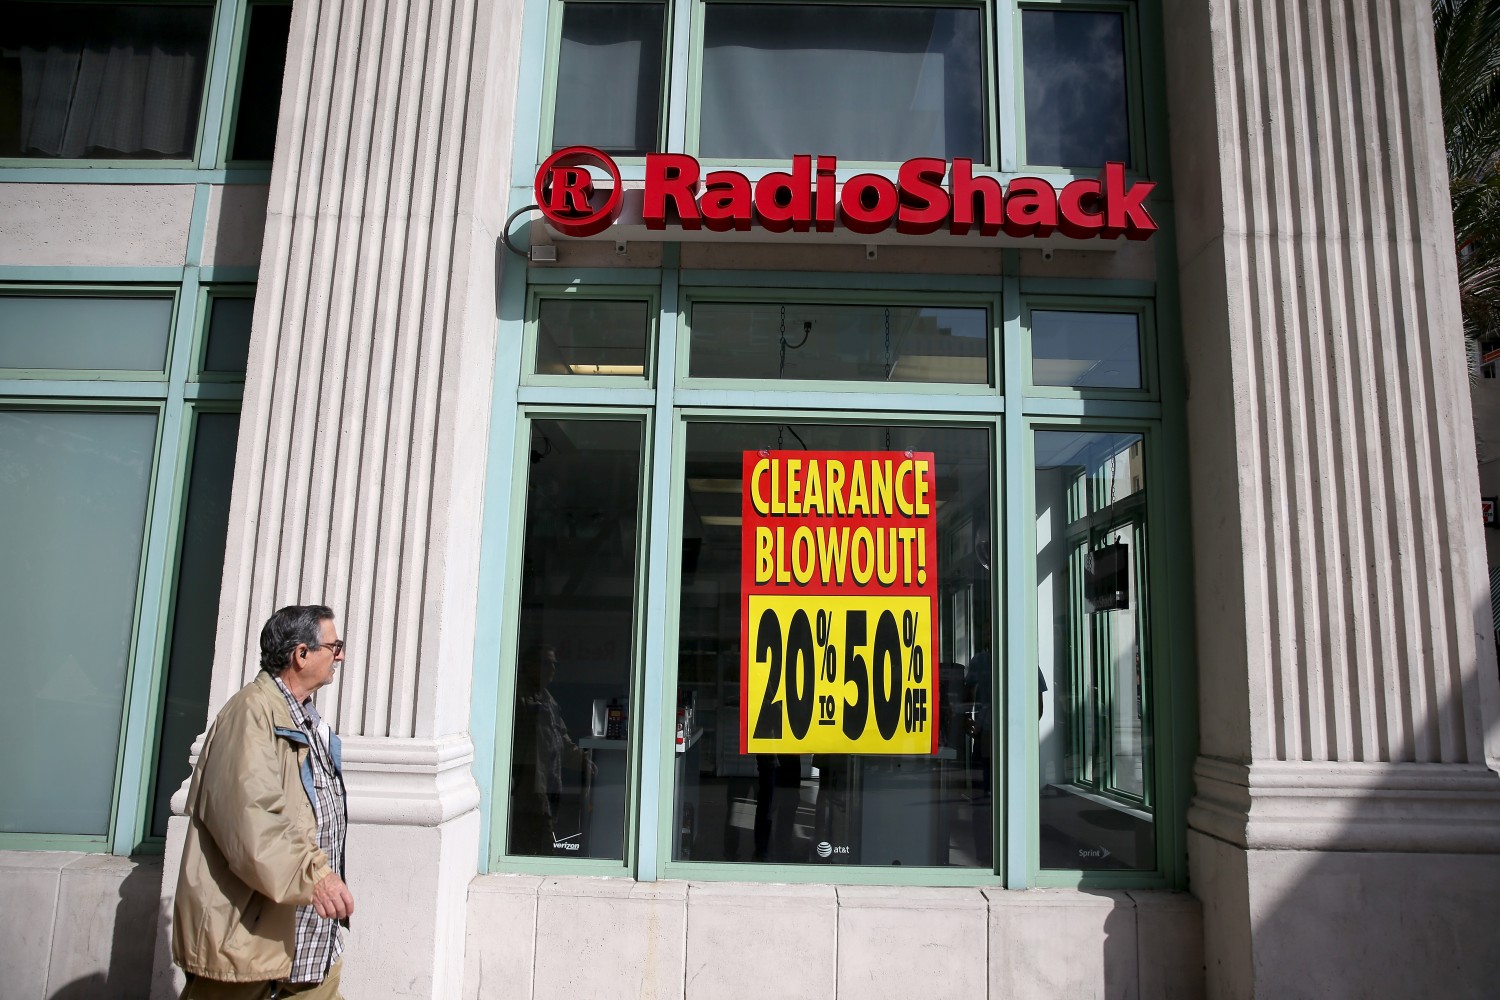 NYSE To Delist RadioShack Shares As Electronics Retailer Continues To Struggle